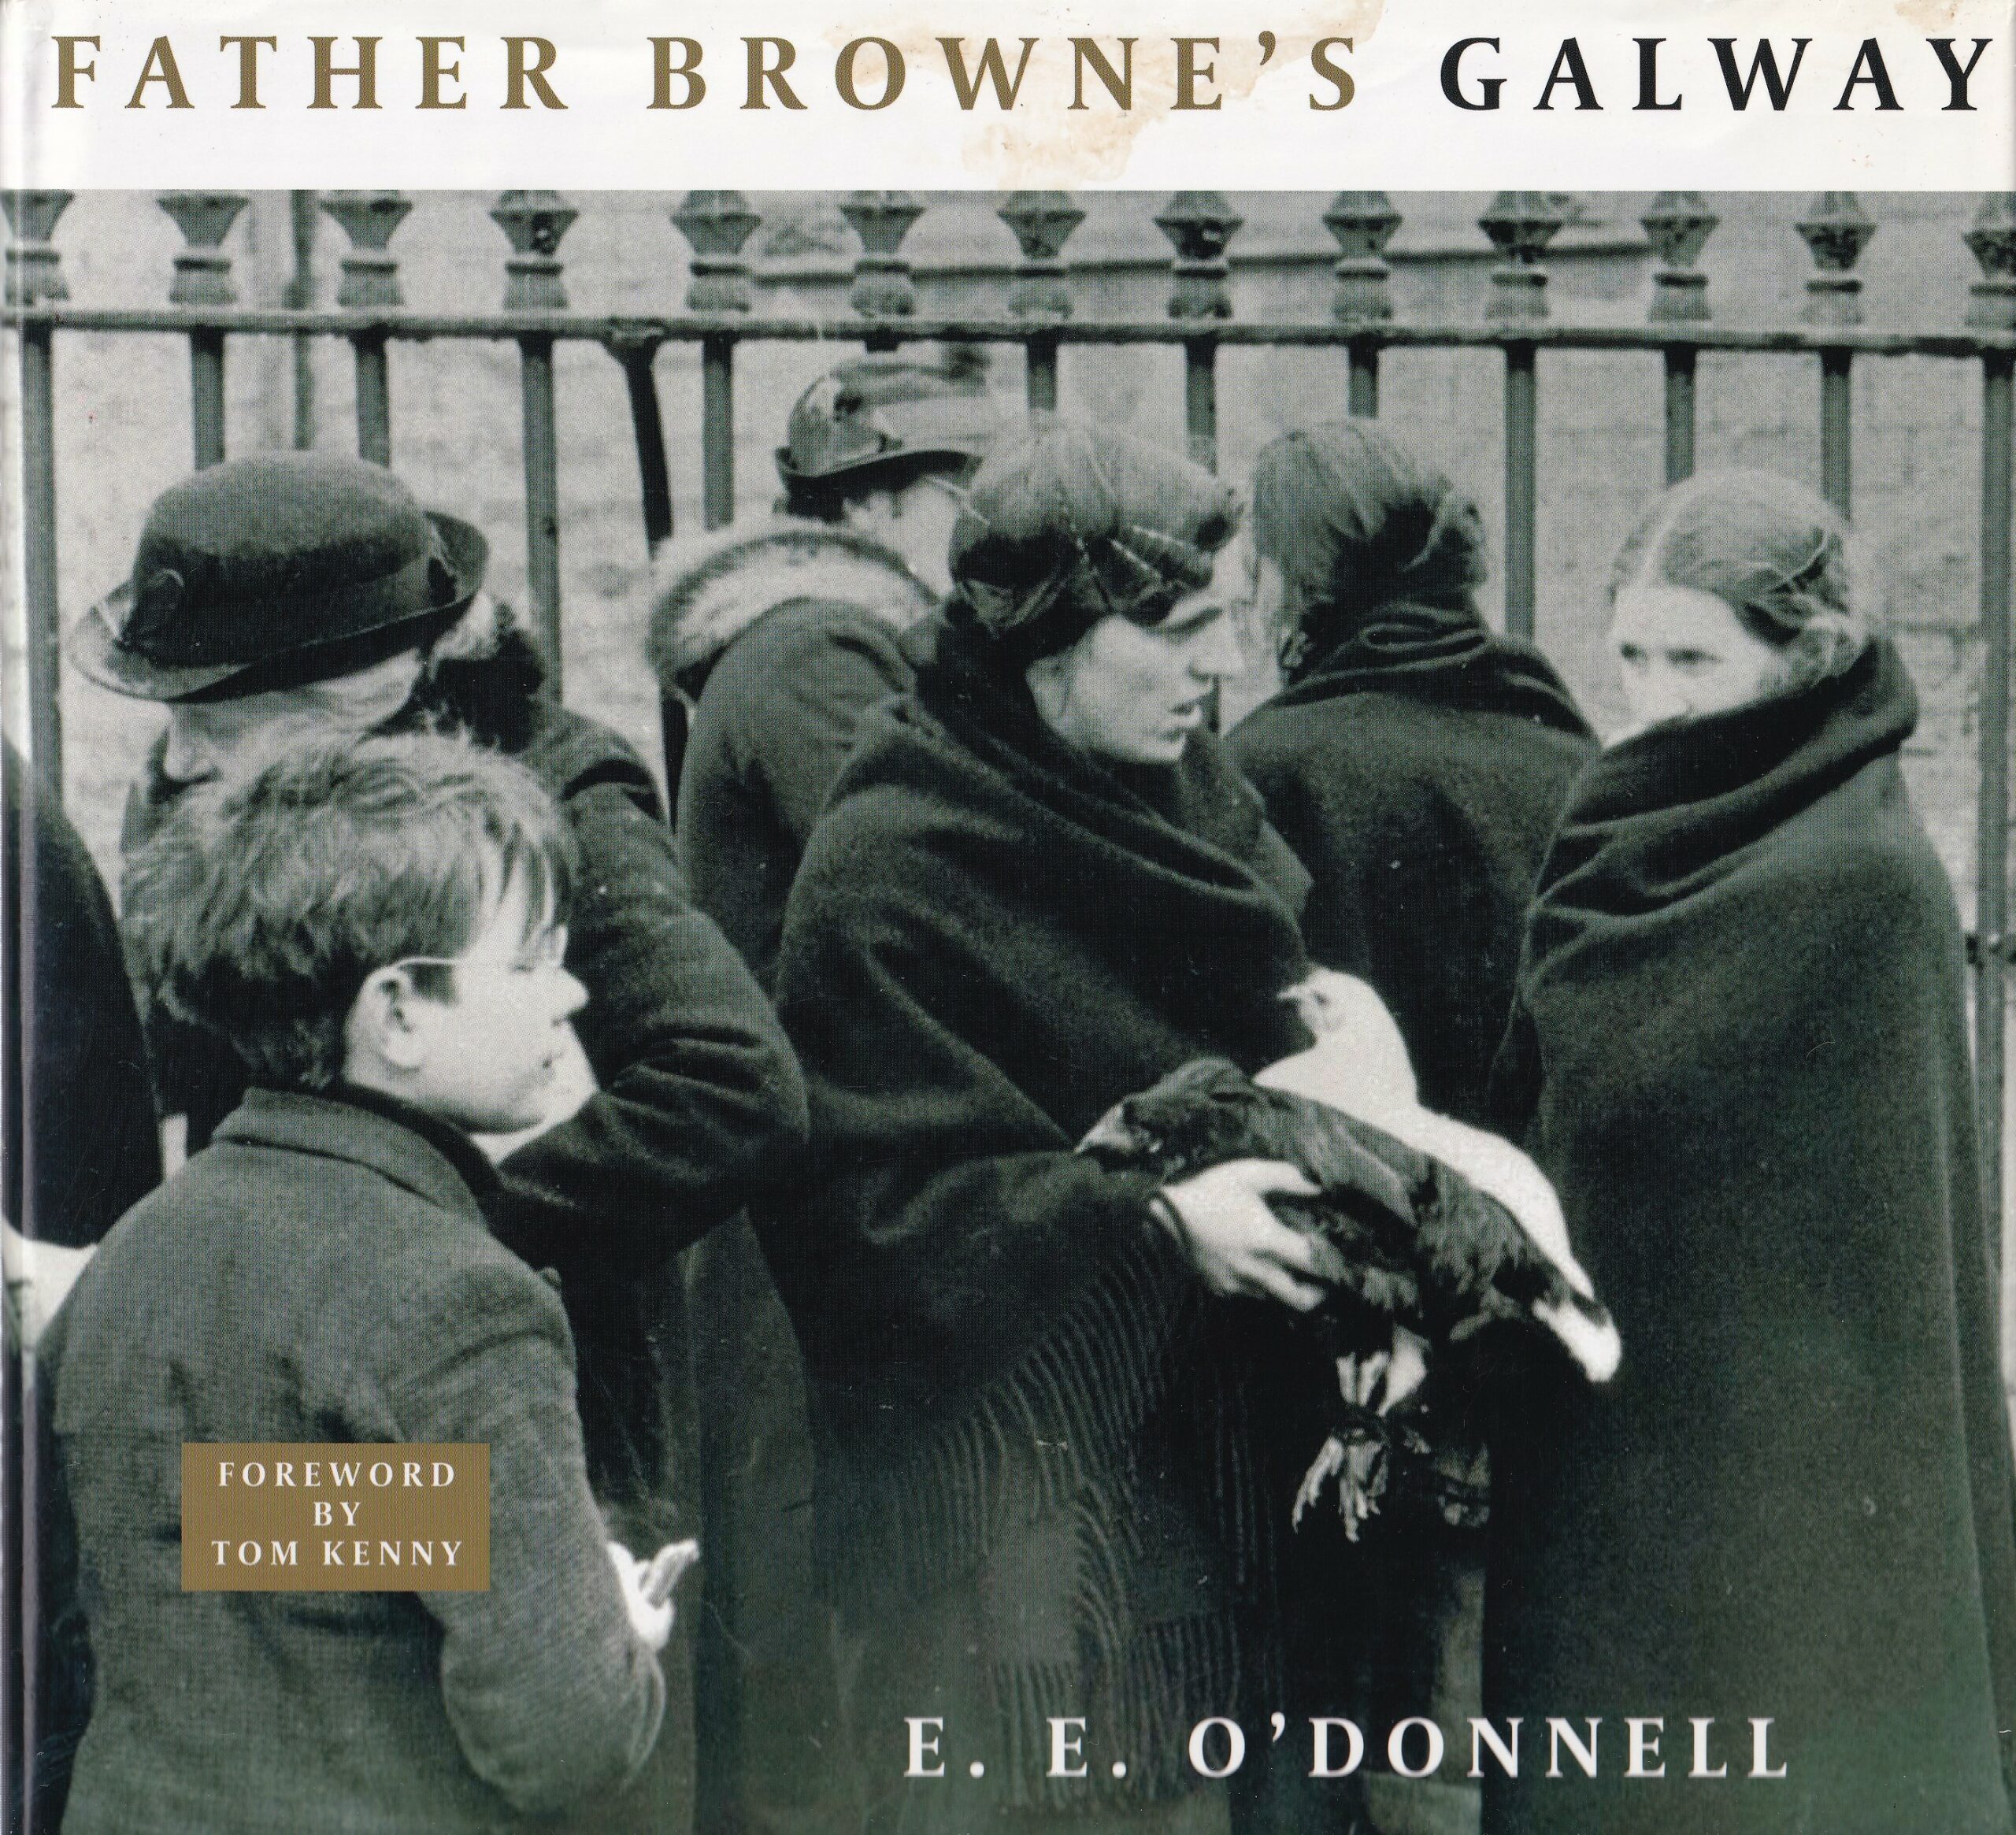 Father Browne’s Galway by E.E. O'Donnell